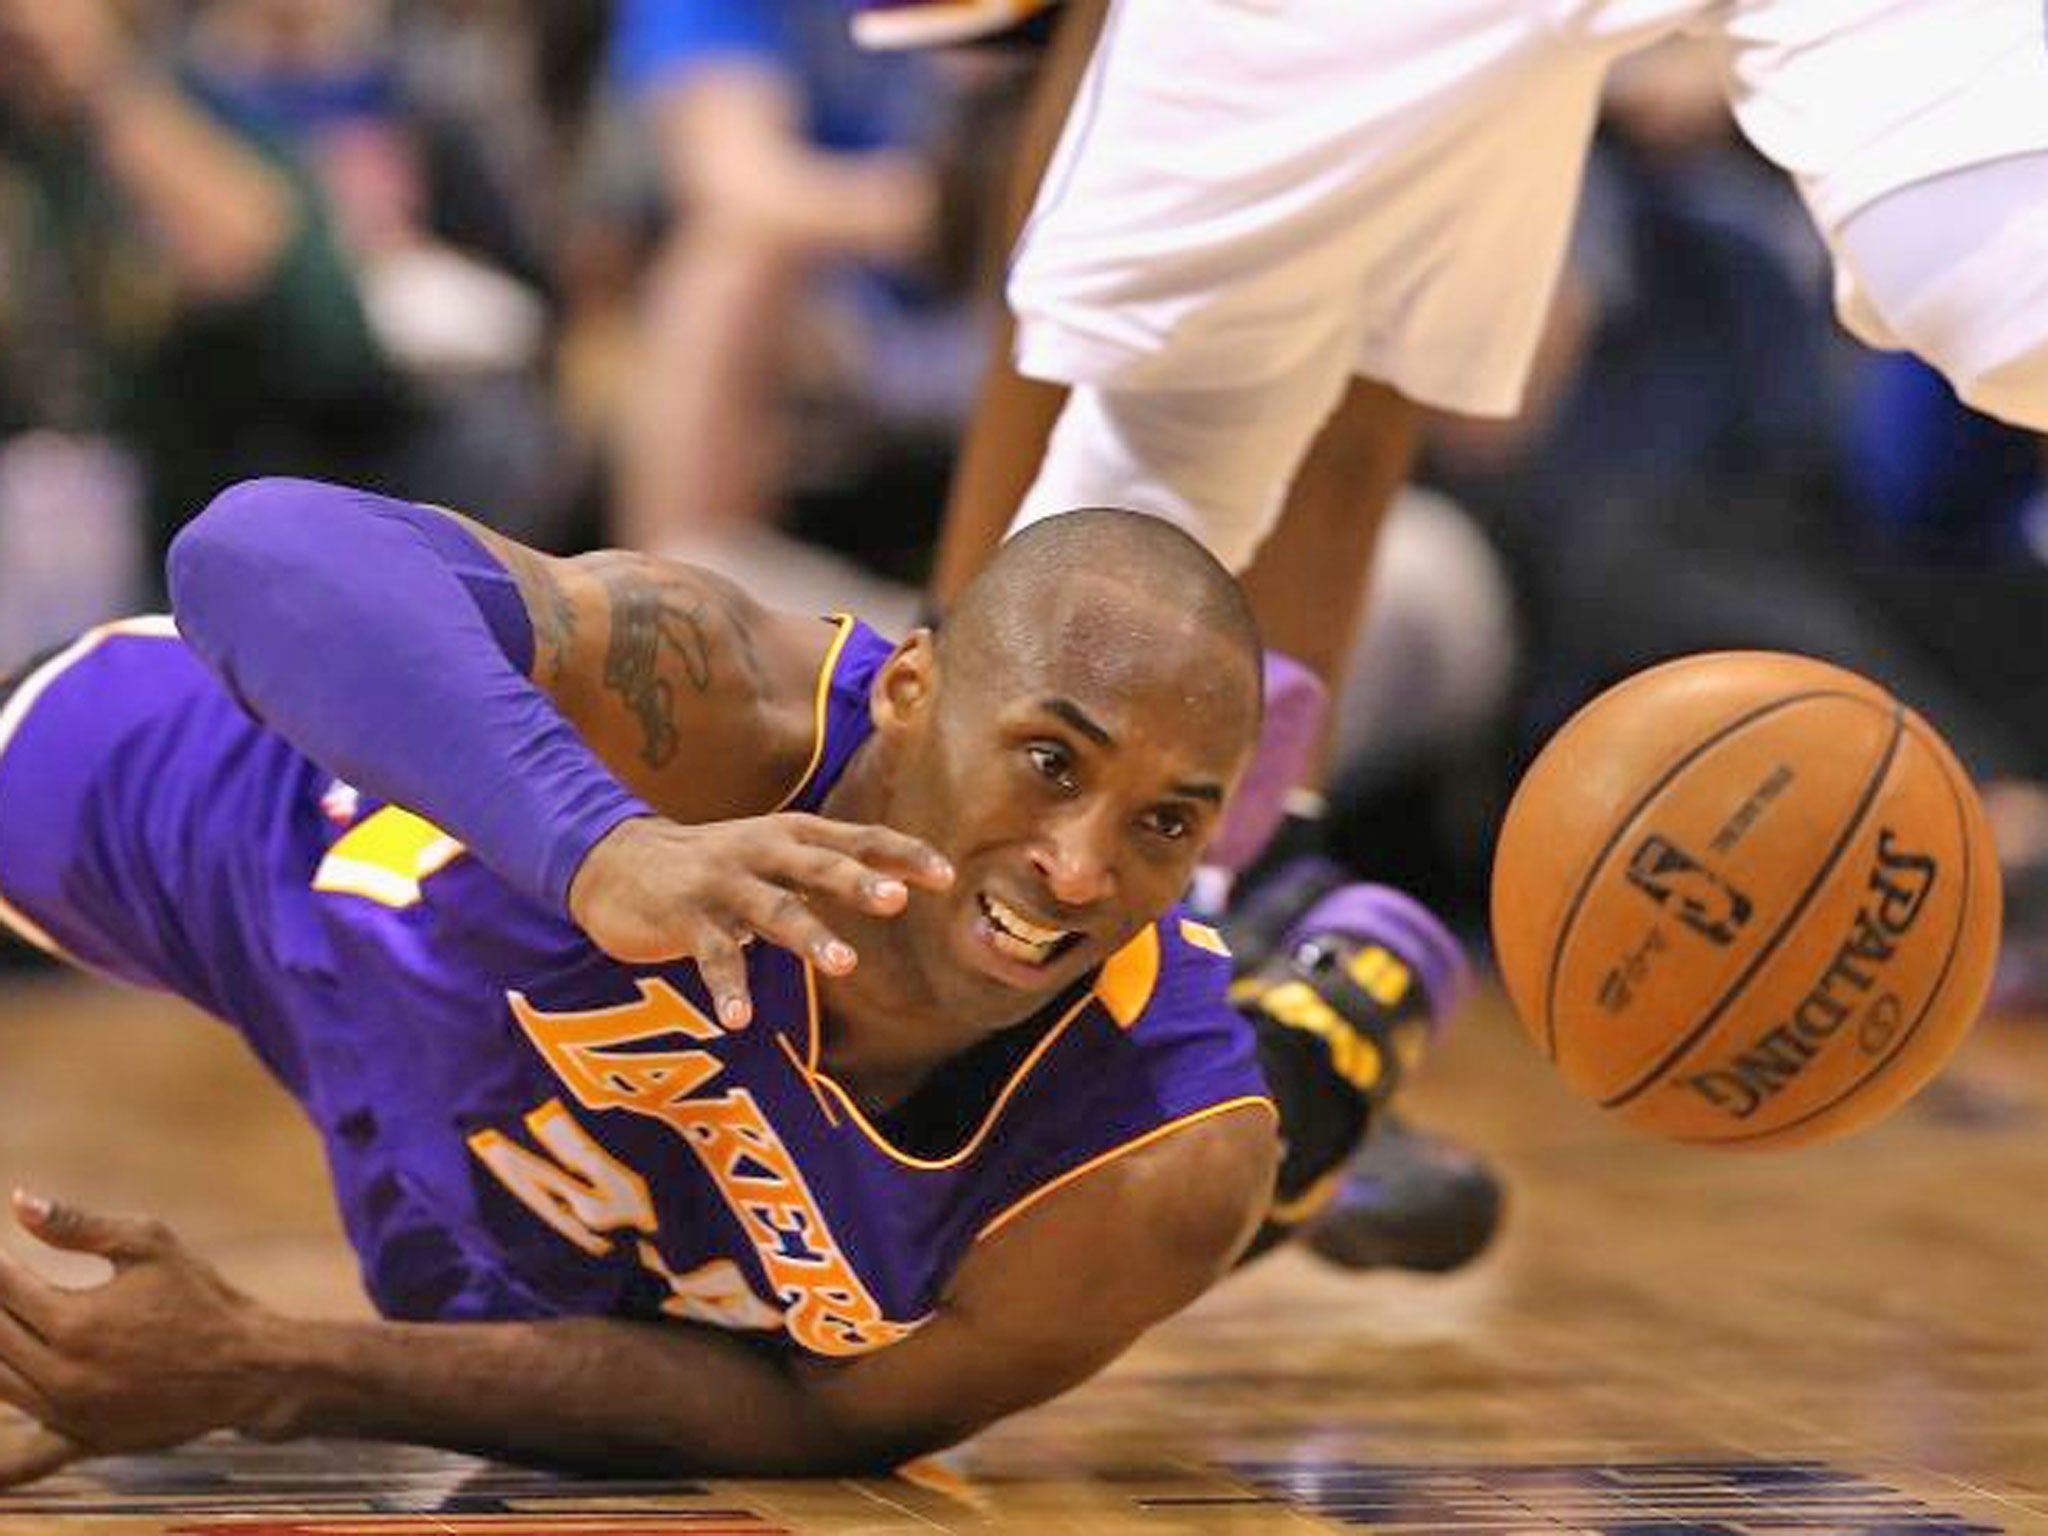 Times are tough at the LA Lakers for Kobe Bryant